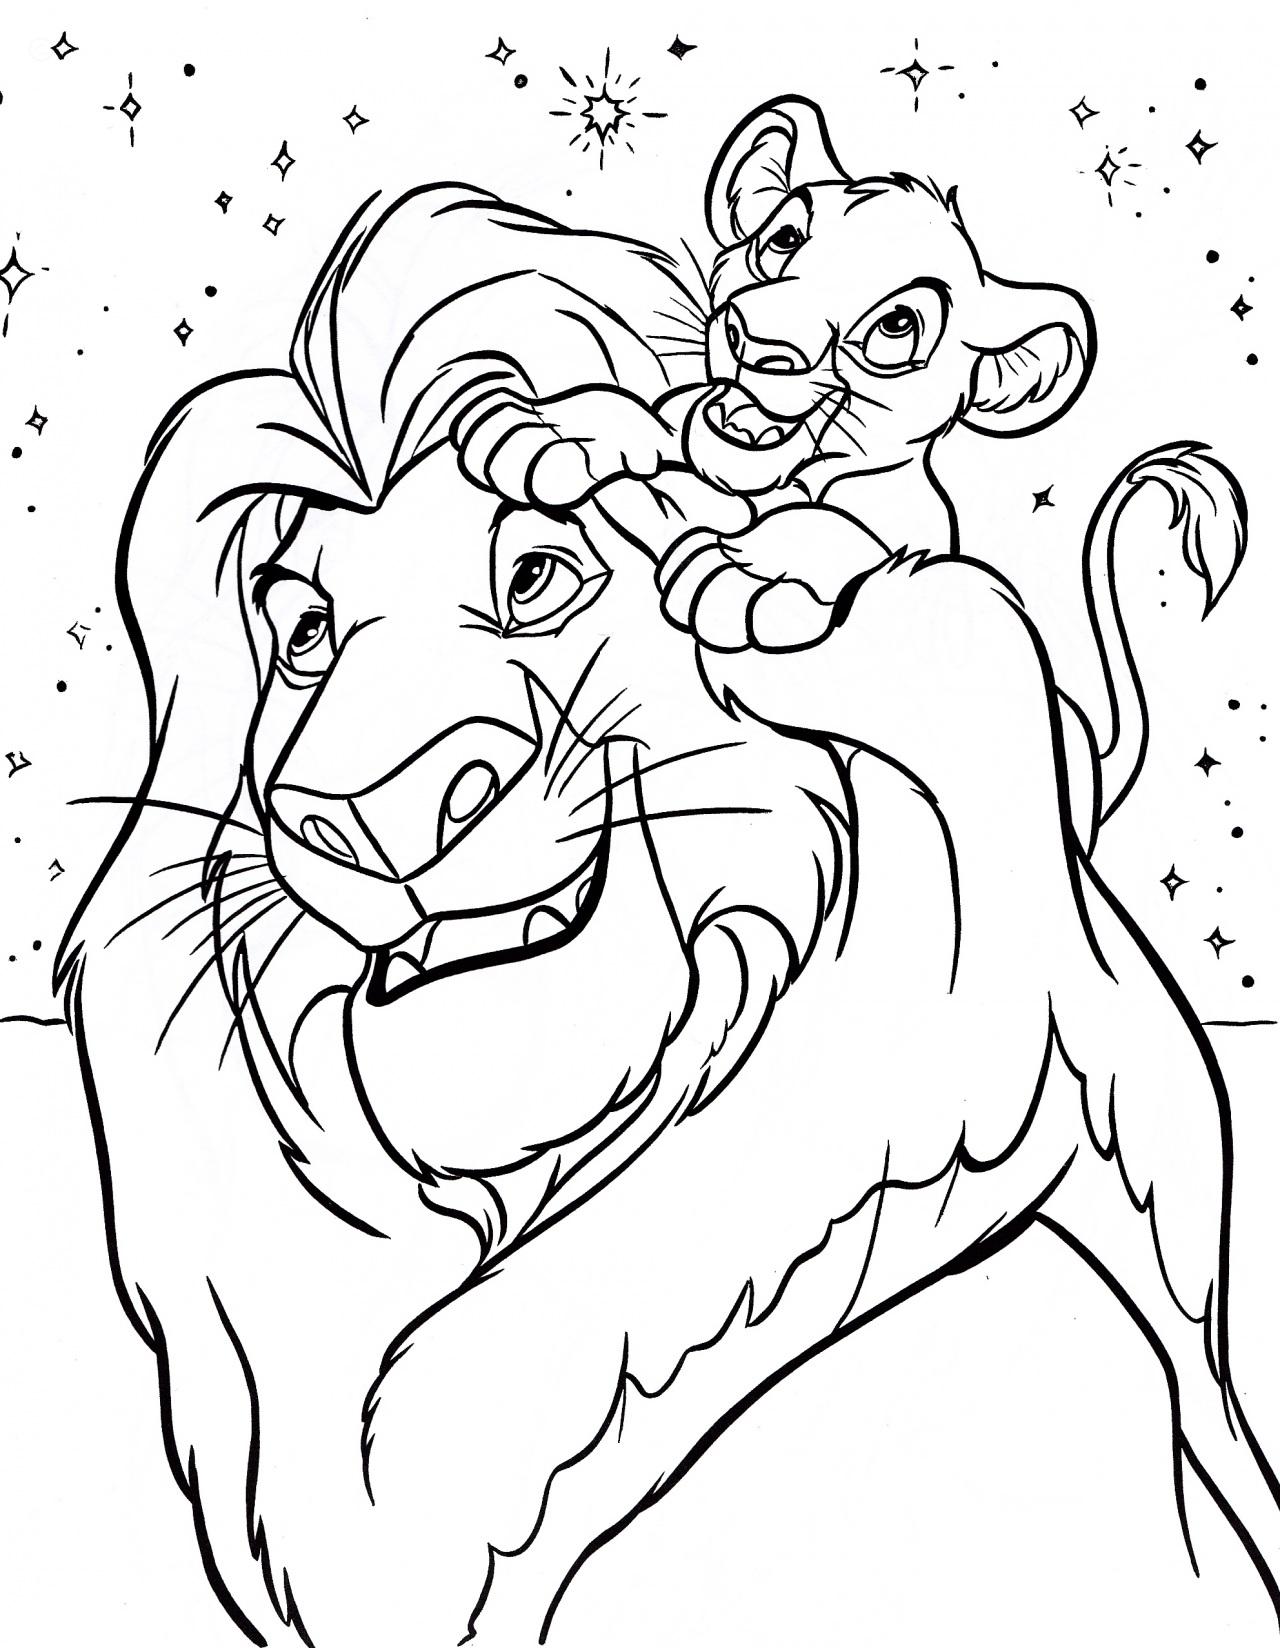 Download Lion King Coloring Pages - Best Coloring Pages For Kids